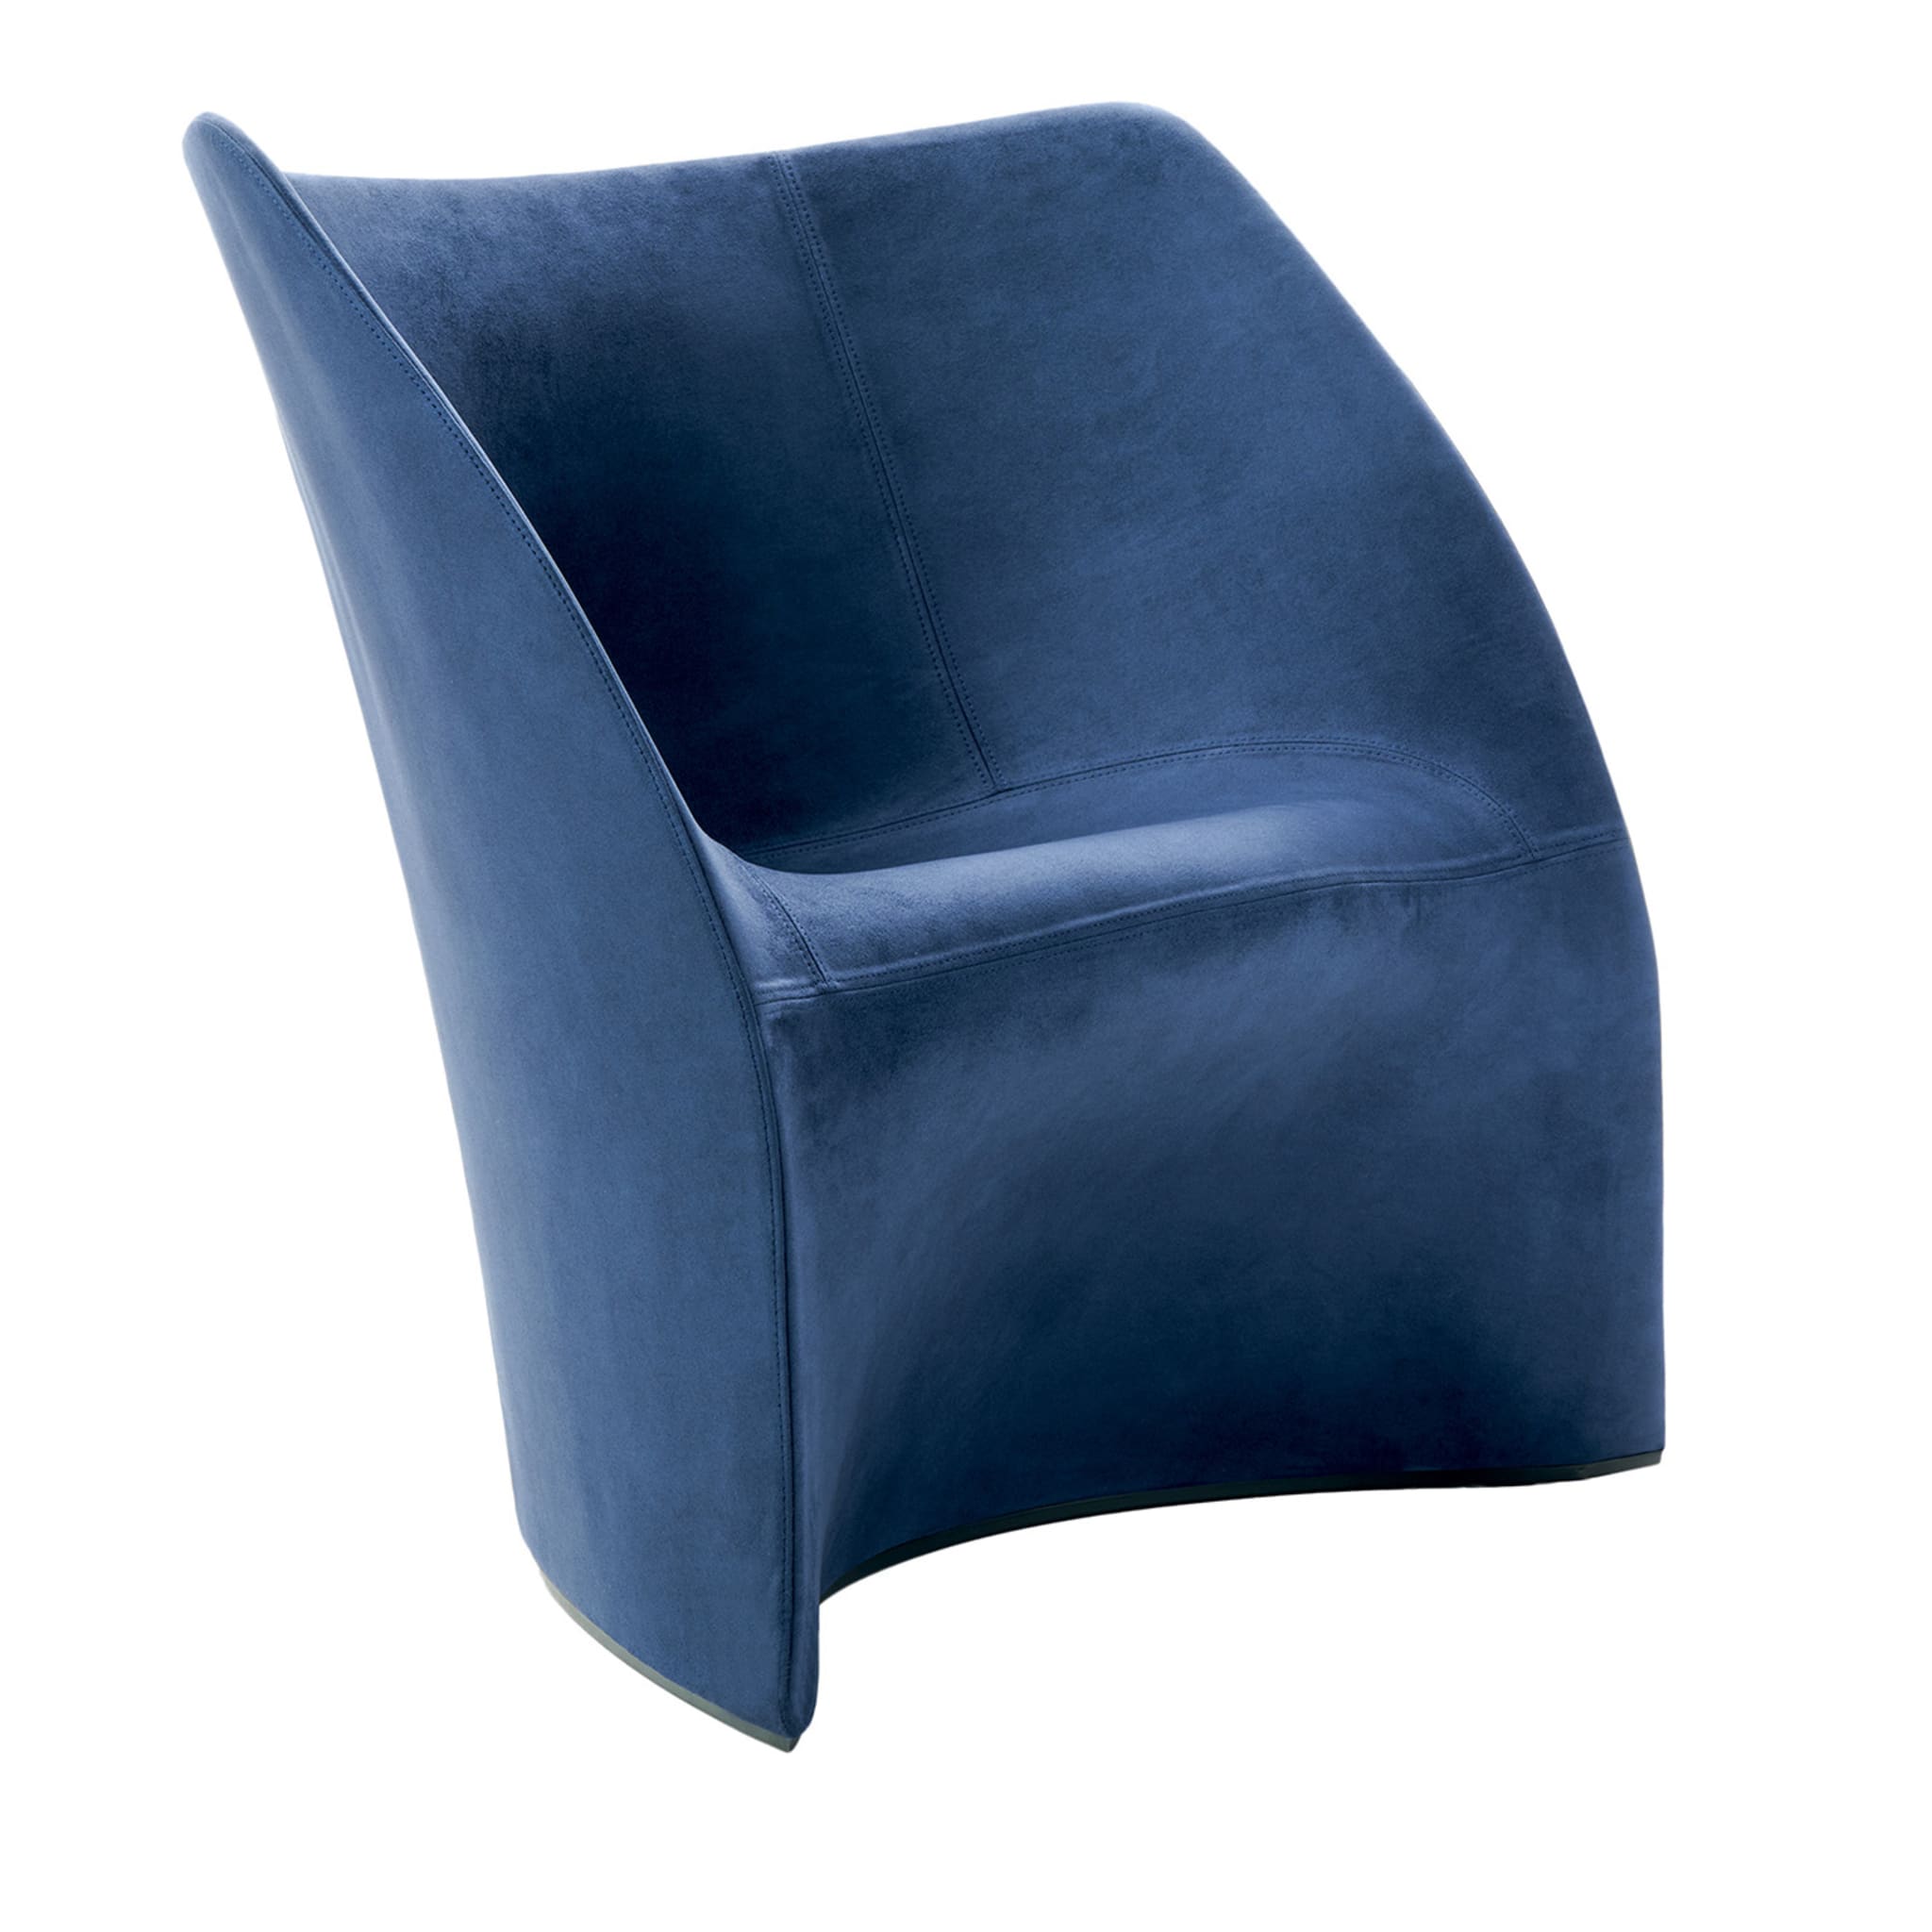 Oyster Blue Armchair by Franco Poli - Main view